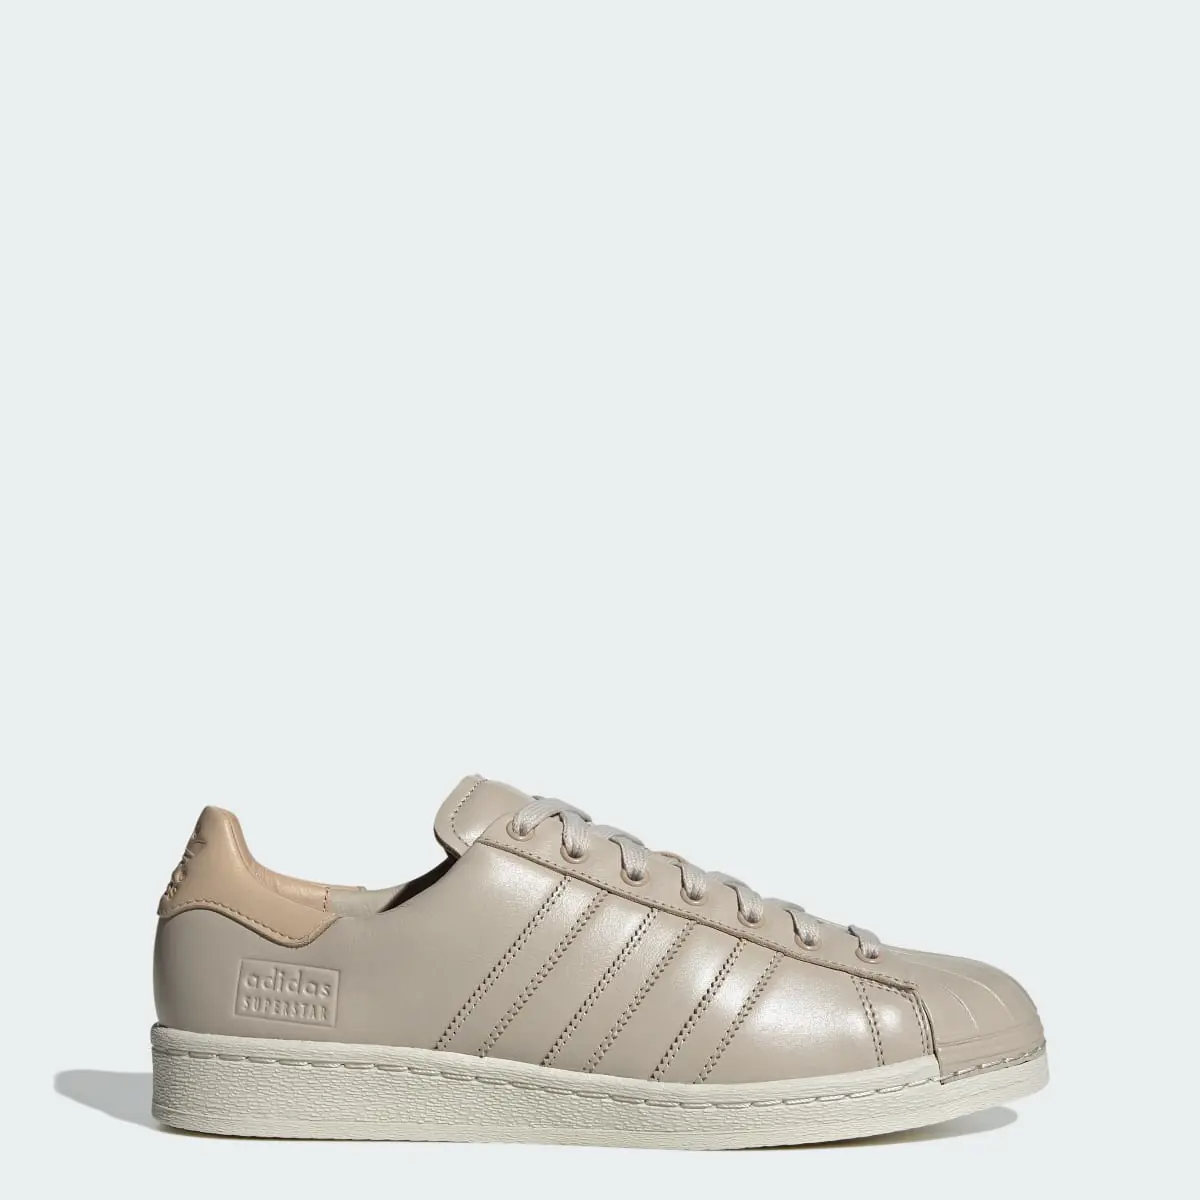 Adidas Superstar Lux Shoes. 1